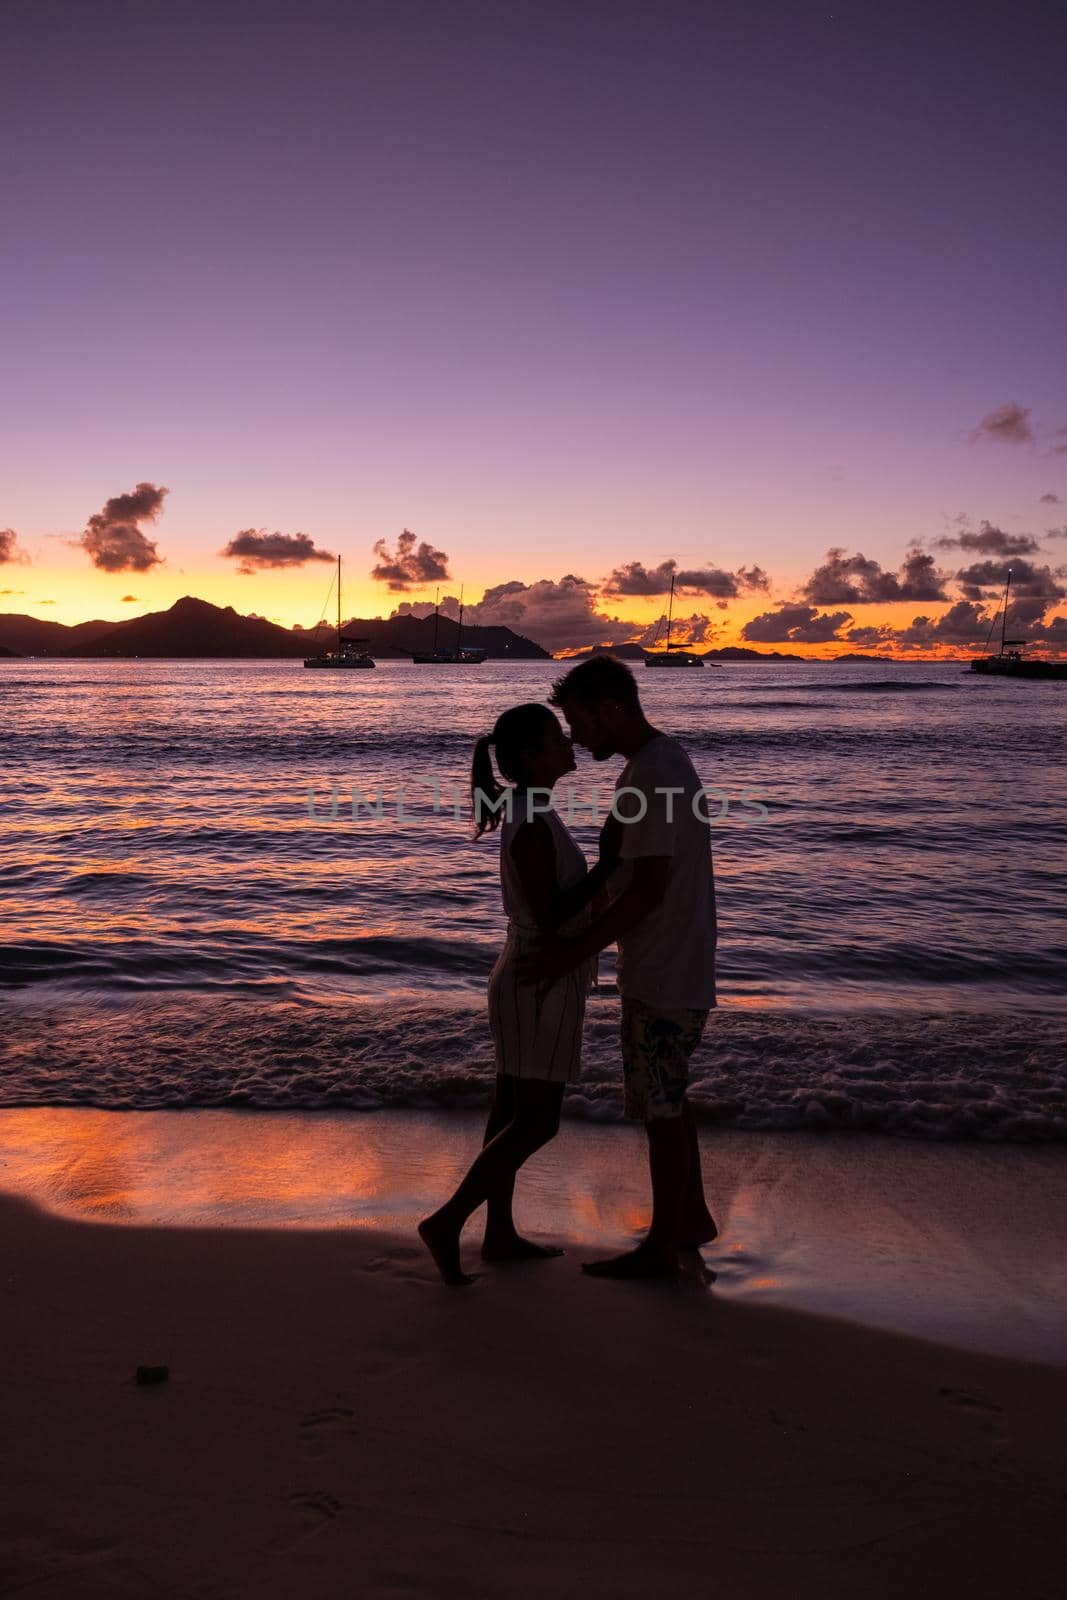 Anse Patates, La Digue Seychelles, a young couple of men and women on a tropical beach during a luxury vacation in Seychelles. Tropical beach Anse Patates, La Digue Seychelles